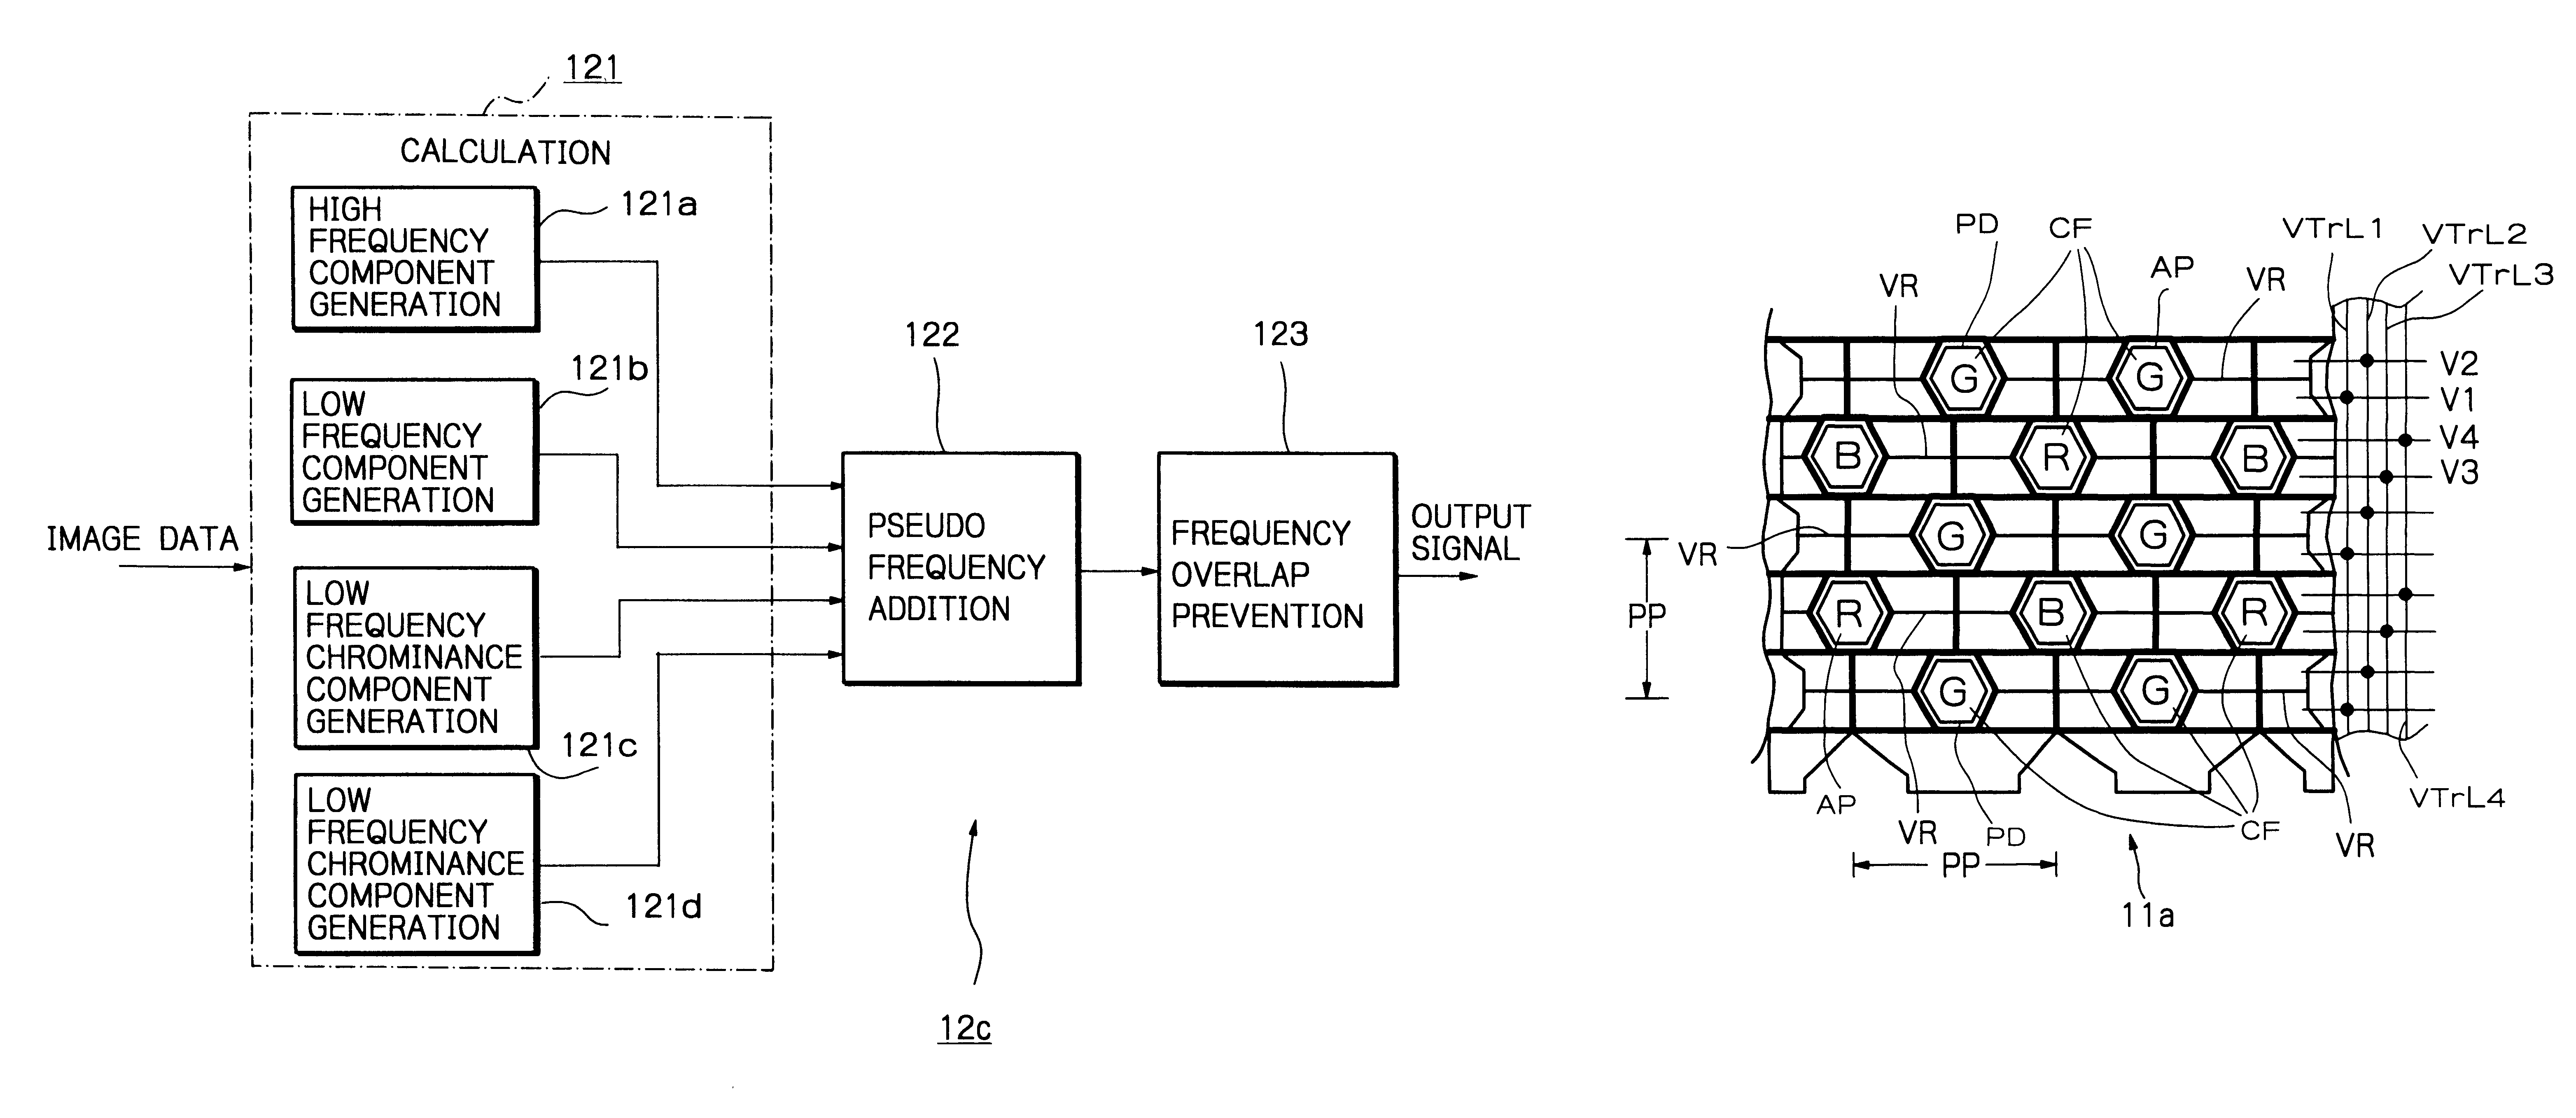 Solid-state imaging apparatus and signal processing method for transforming image signals output from a honeycomb arrangement to high quality video signals